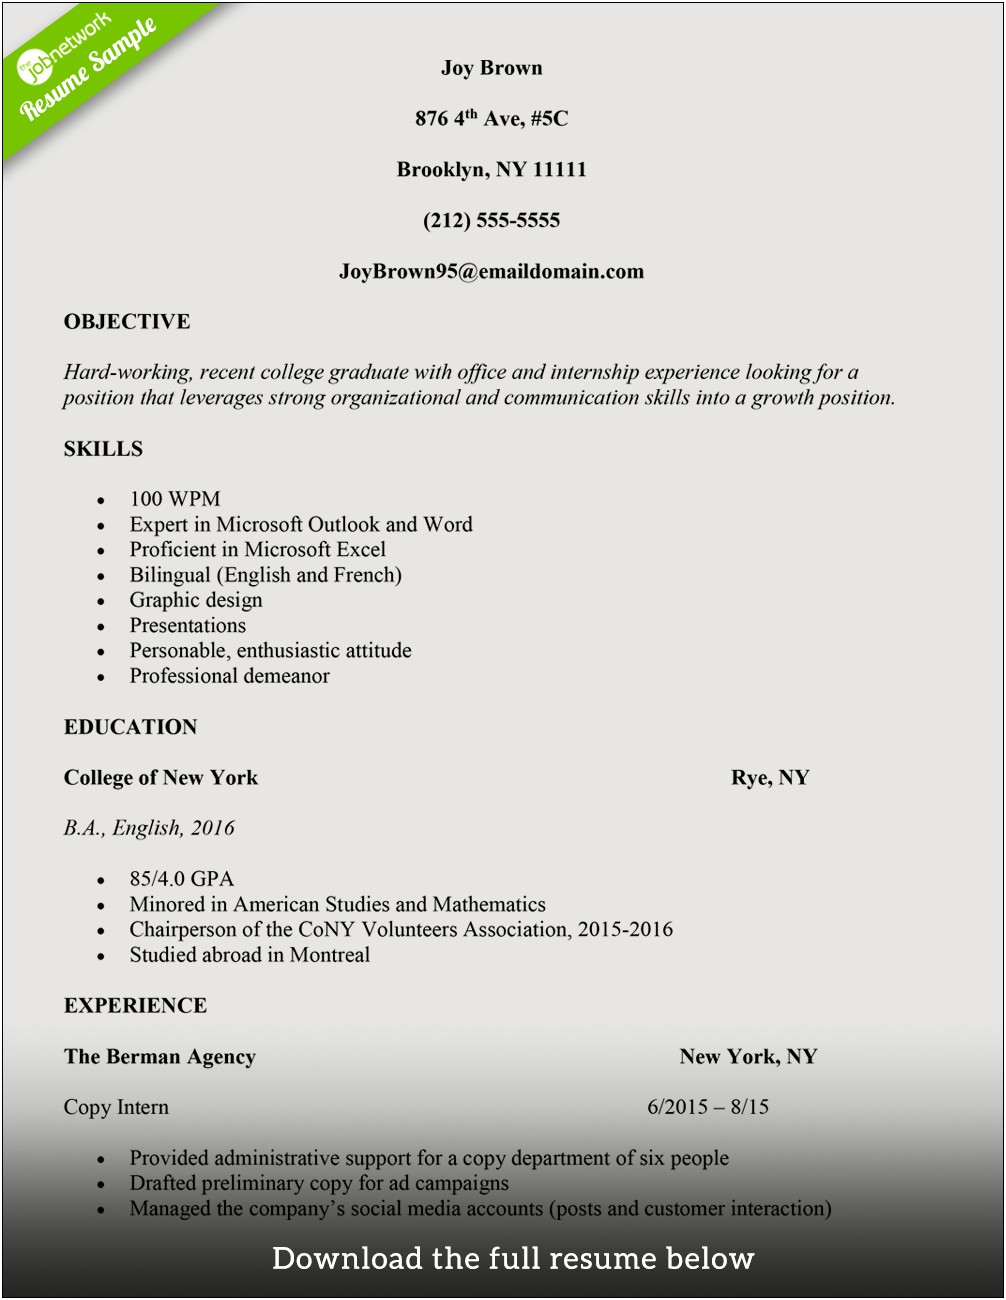 Resume Samples For Students Seeking Graduate Administrative Assistant